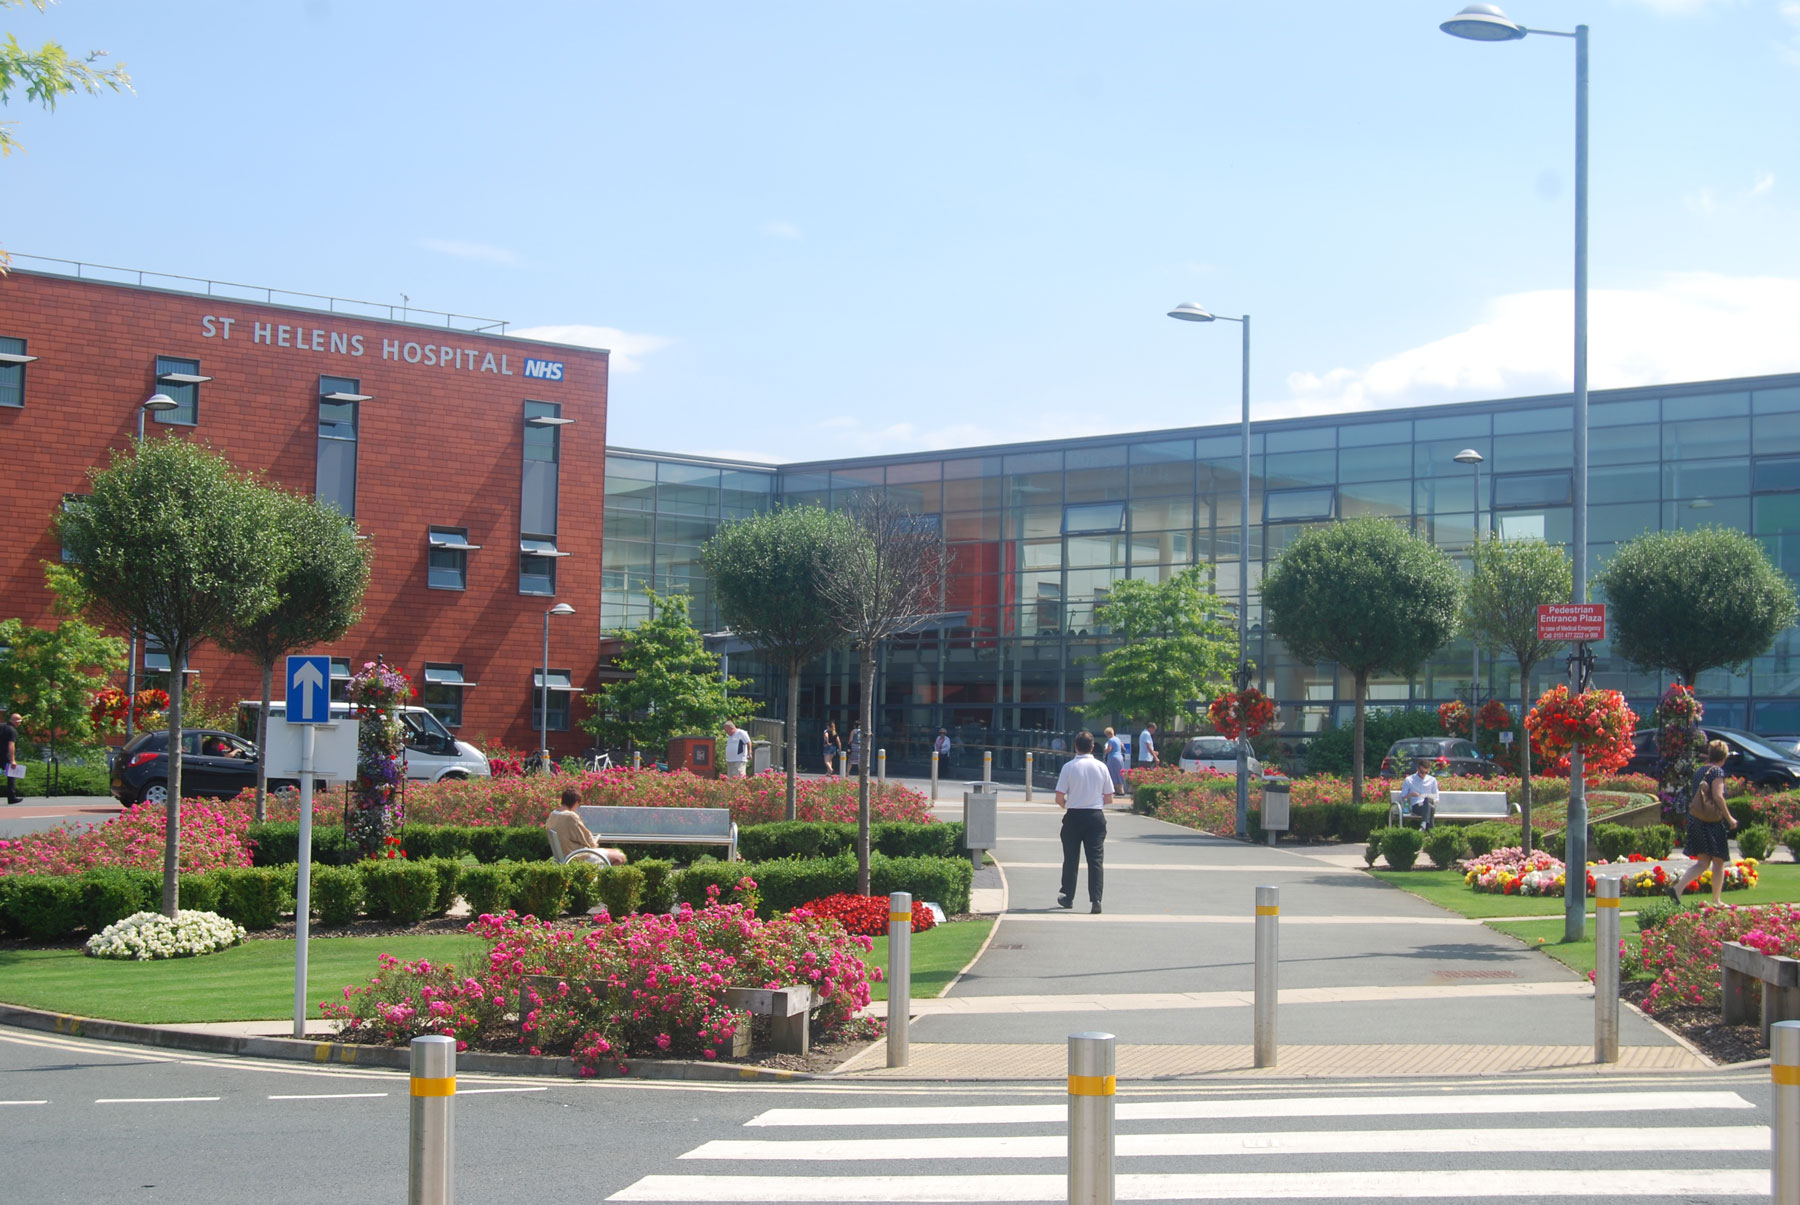 Photograph of the exterior at St Helens Hospital